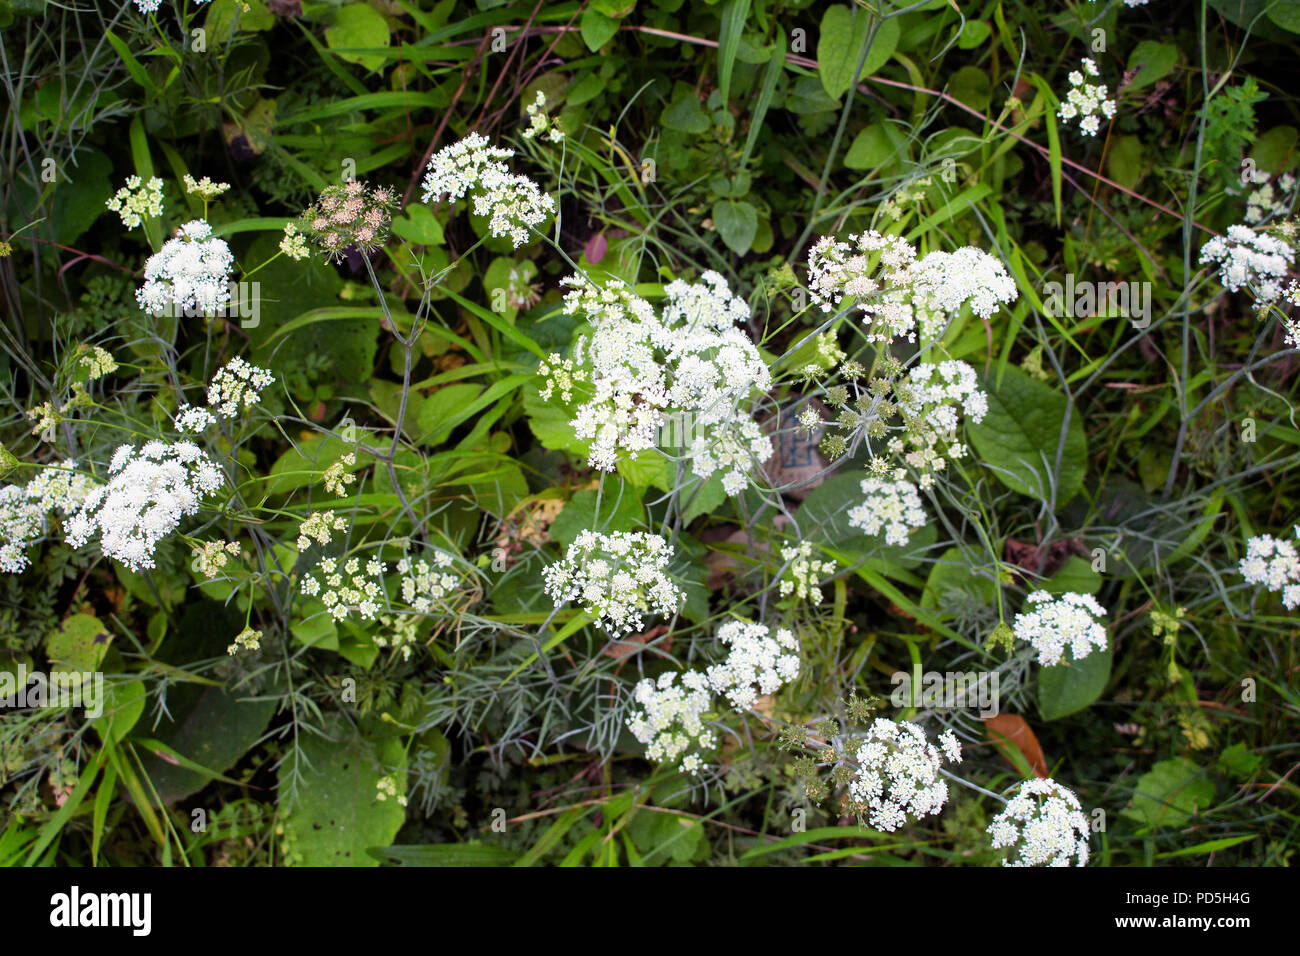 View of wild plant (Pimpinella anisum or anise). The image is captured in Trabzon city located in Black Sea region of Turkey. Stock Photo